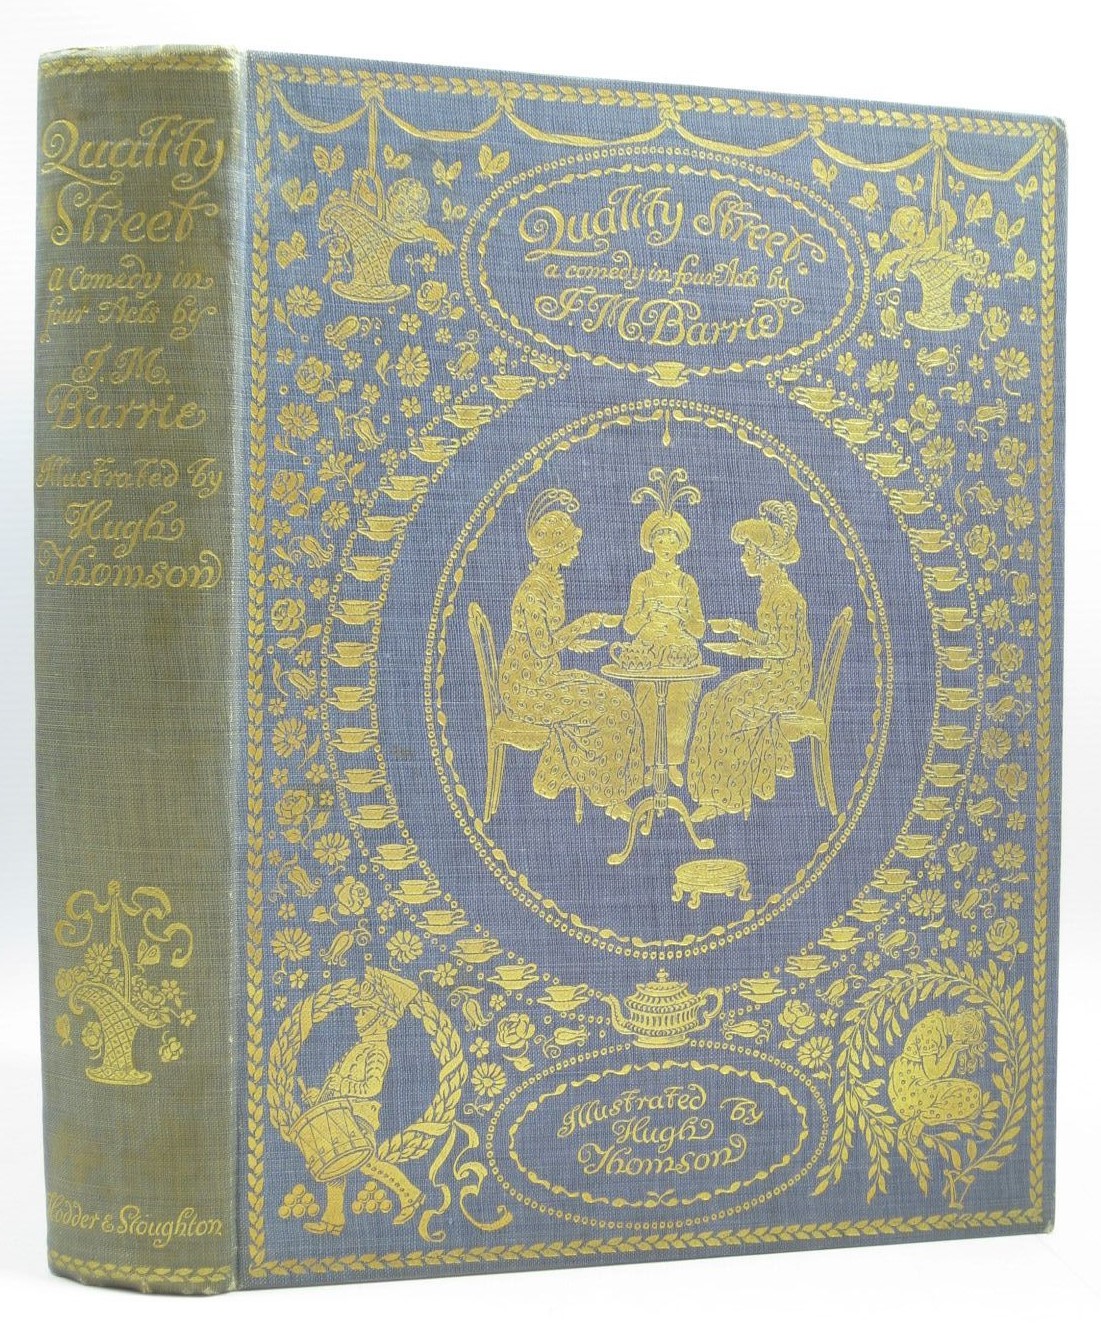 Quality Street by J.M. Barrie